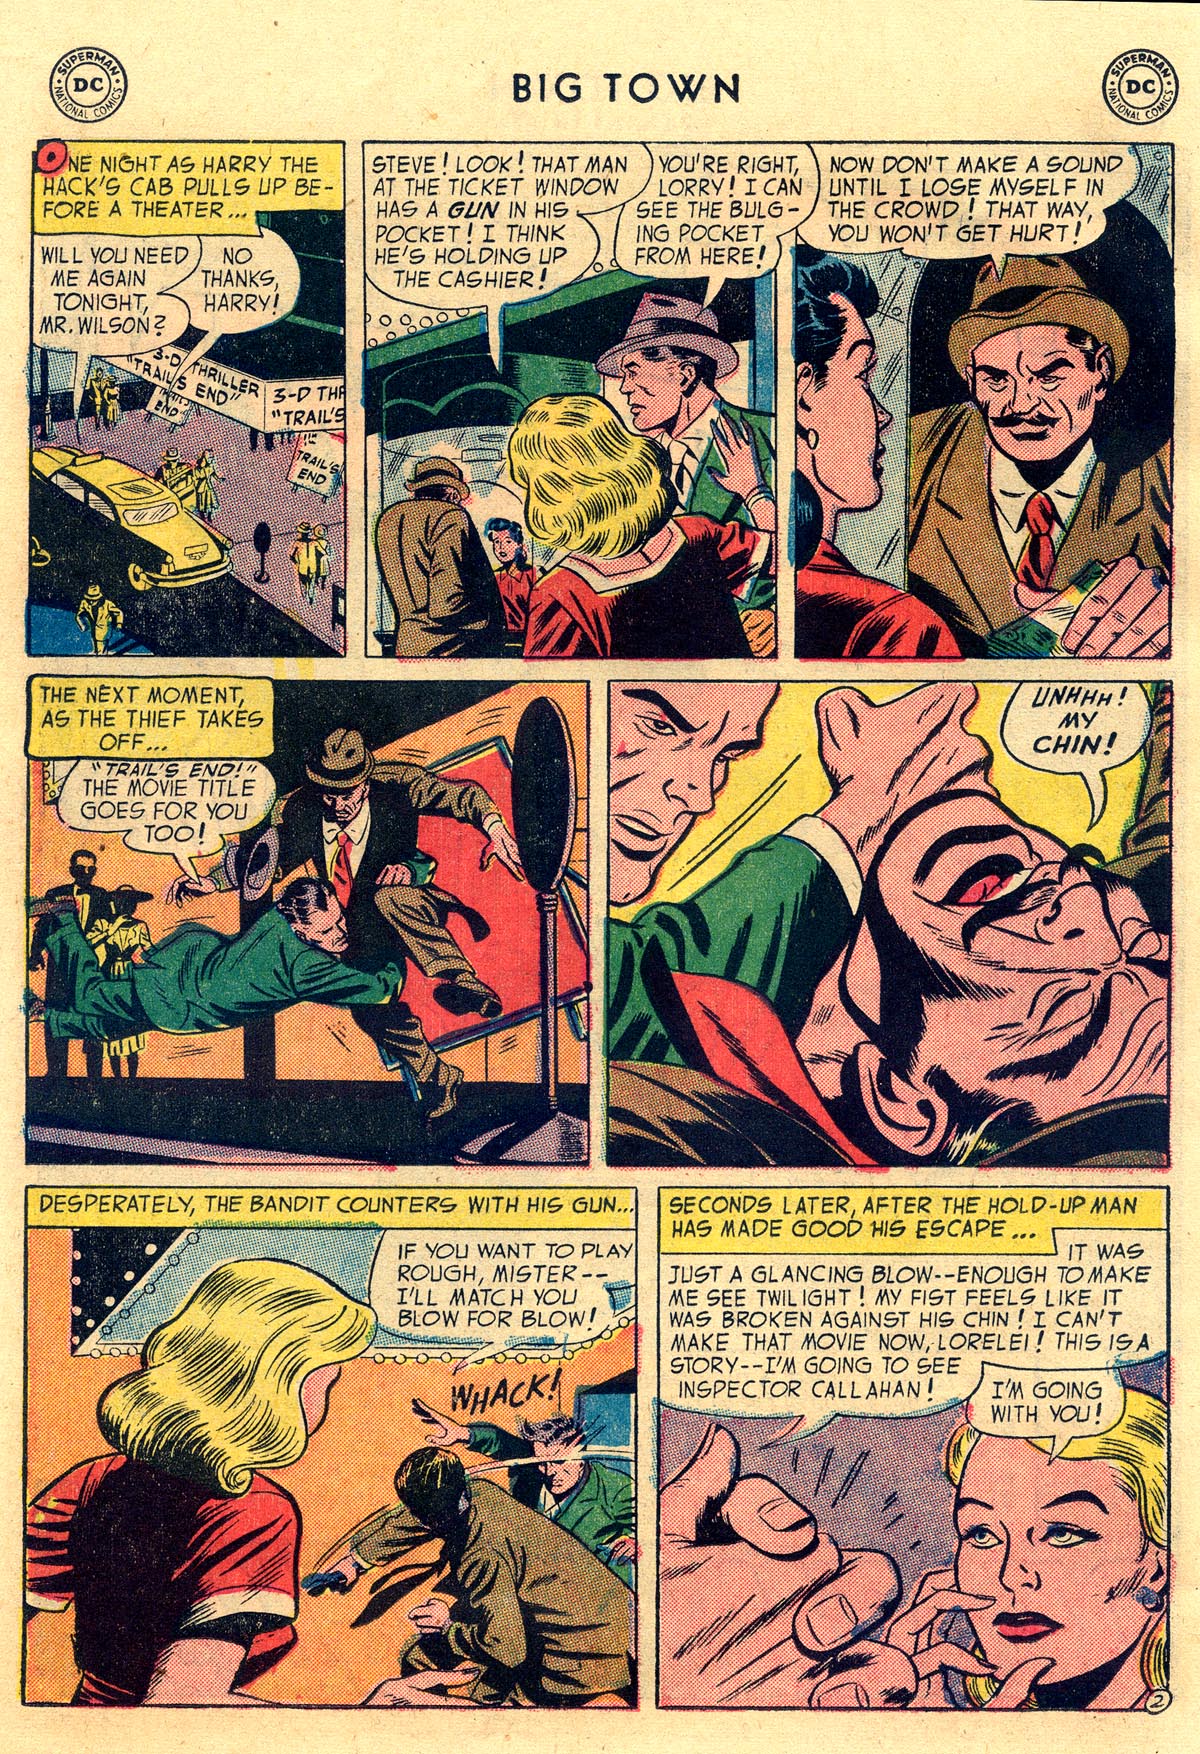 Big Town (1951) 25 Page 25